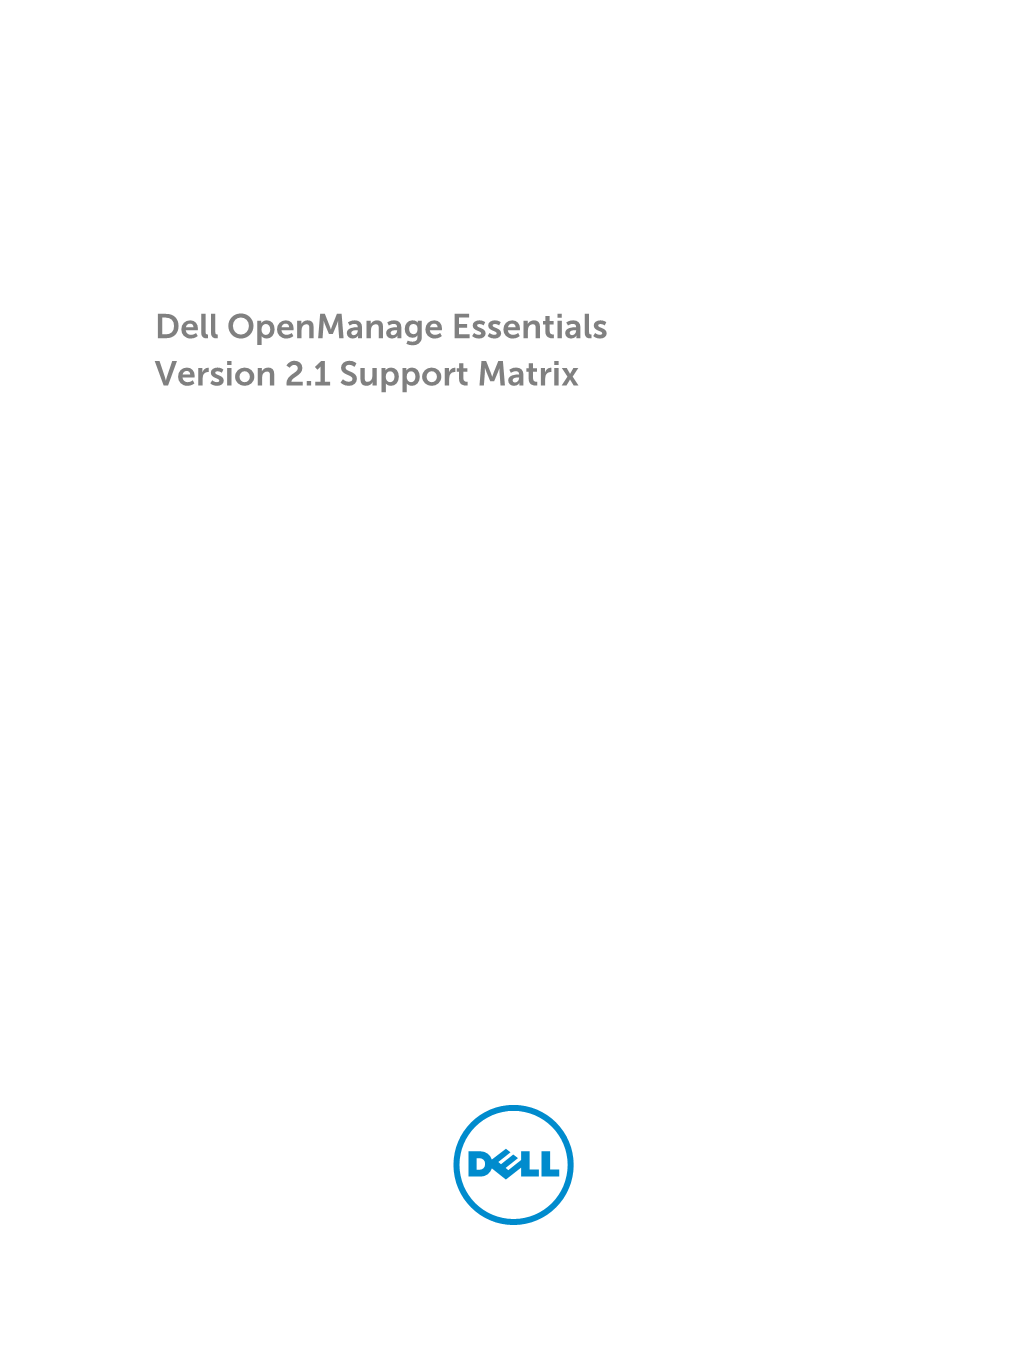 Dell Openmanage Essentials Version 2.1 Support Matrix Notes, Cautions, and Warnings